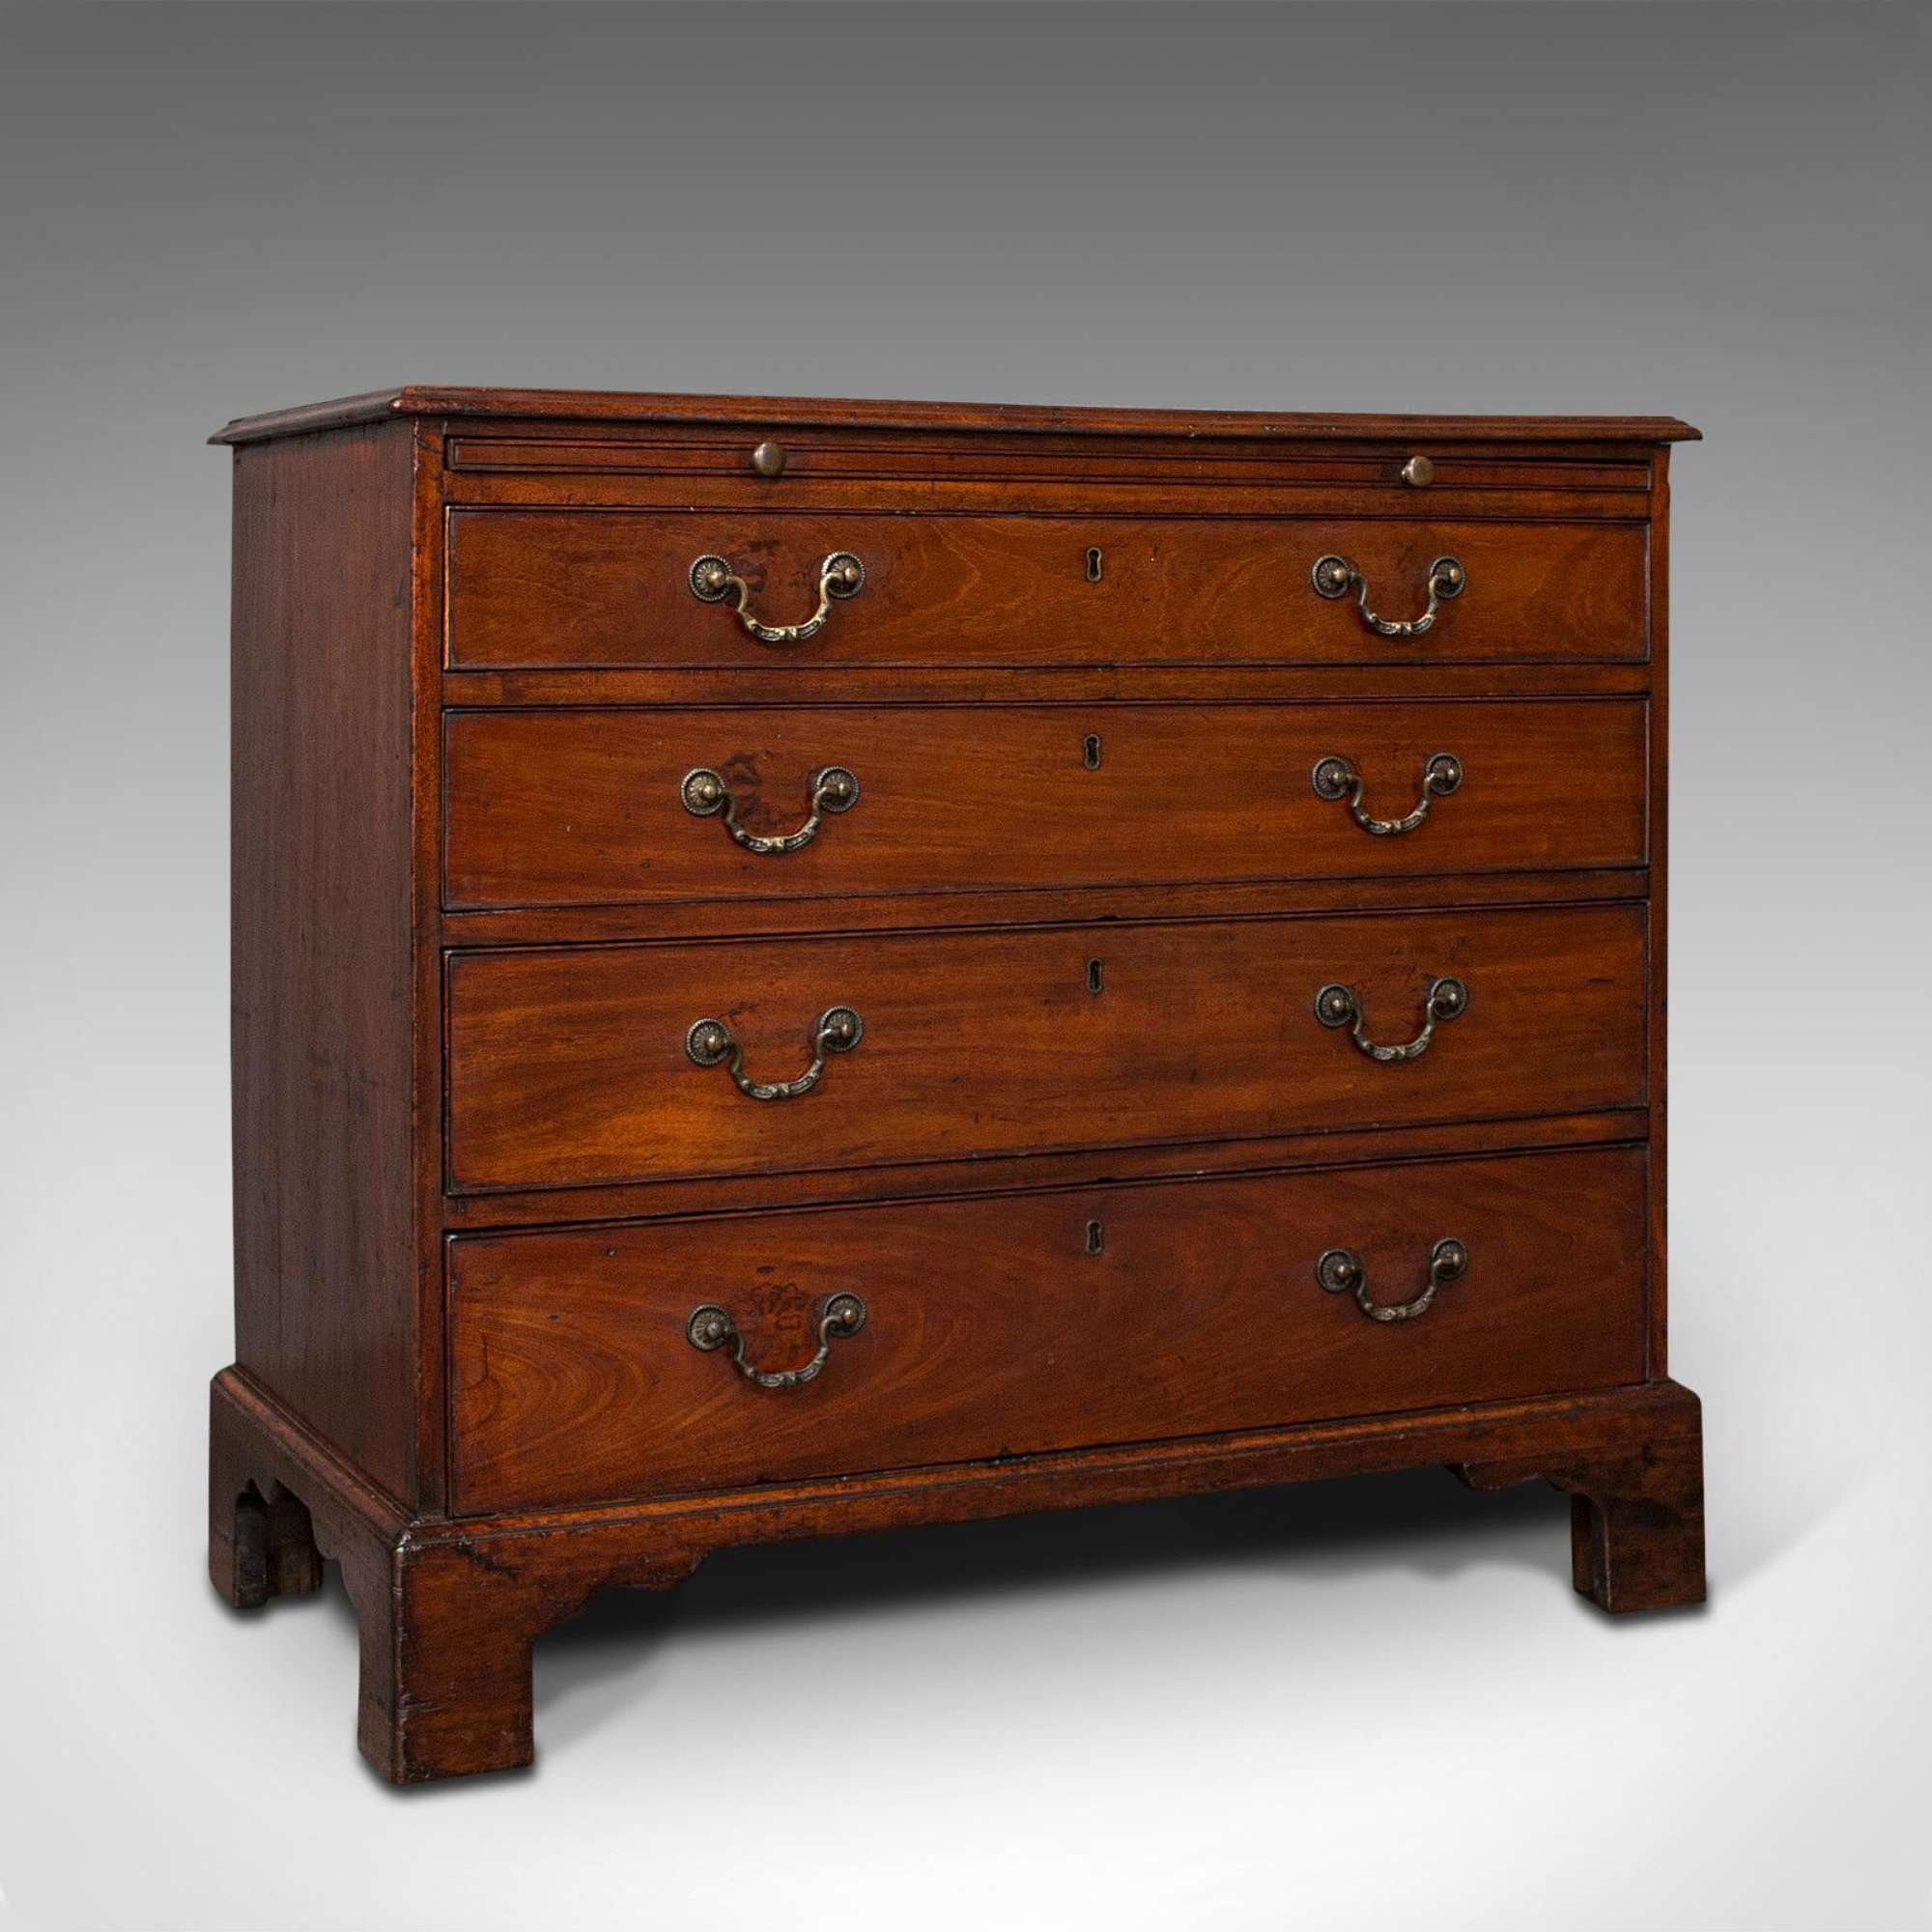 Antique Bachelor's Chest Of Drawers, English, Flame Mahogany, Georgian C.1780